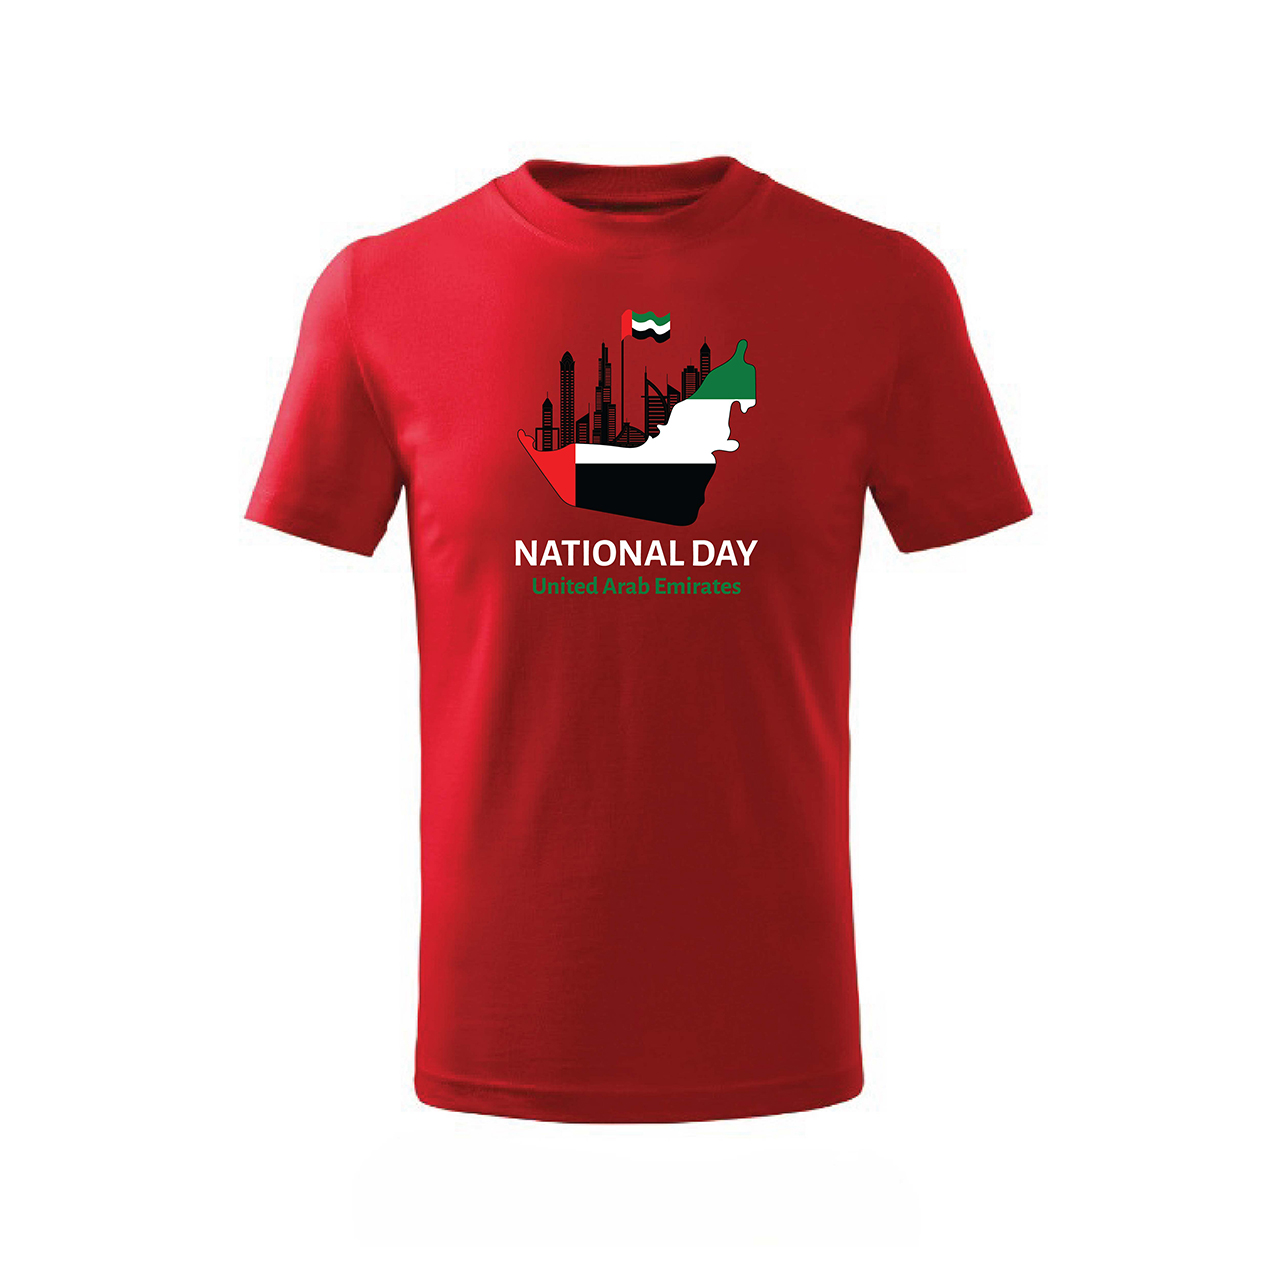 UAE NATIONAL RED COLOR TSHIRT FOR ADULT UNISEX